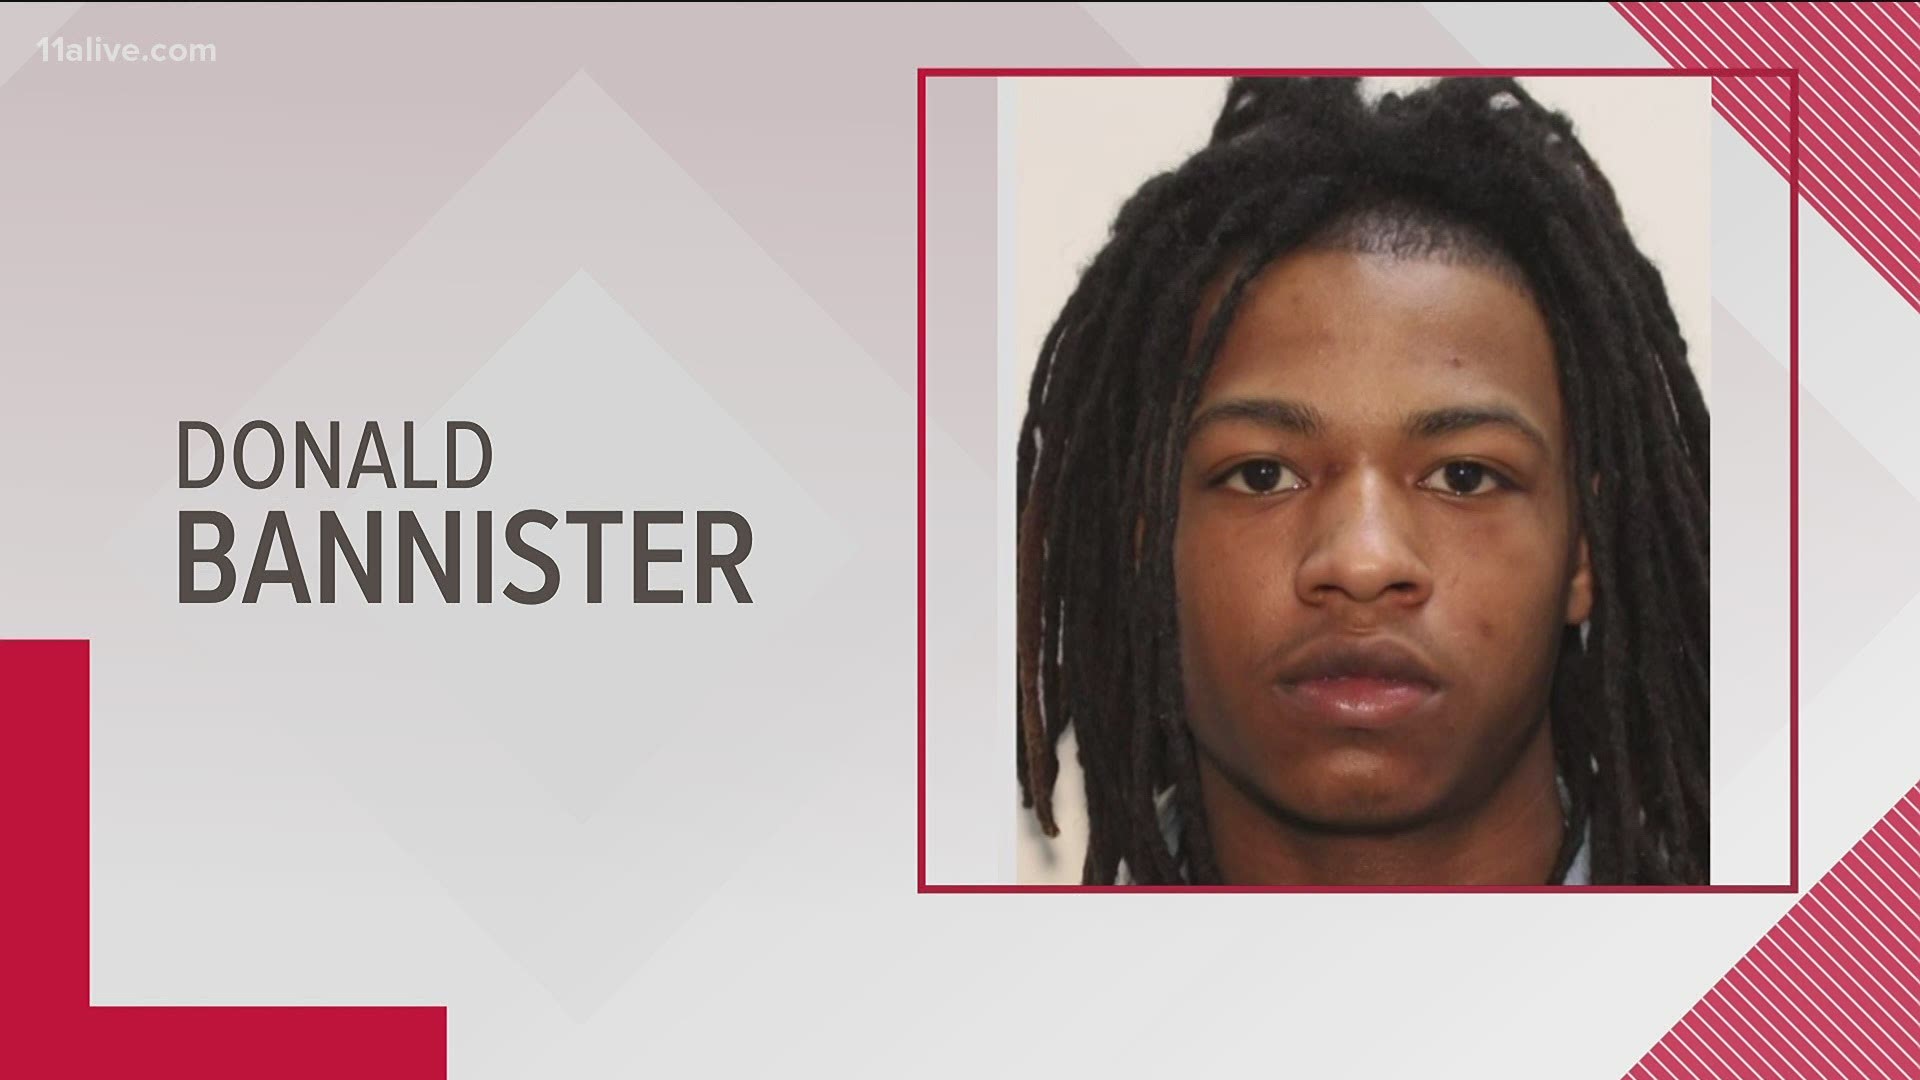 Marietta Police identifying Donald Bannister also known as "lil ghost" as the person suspected of shooting a man along Massachusetts Avenue on June 15.